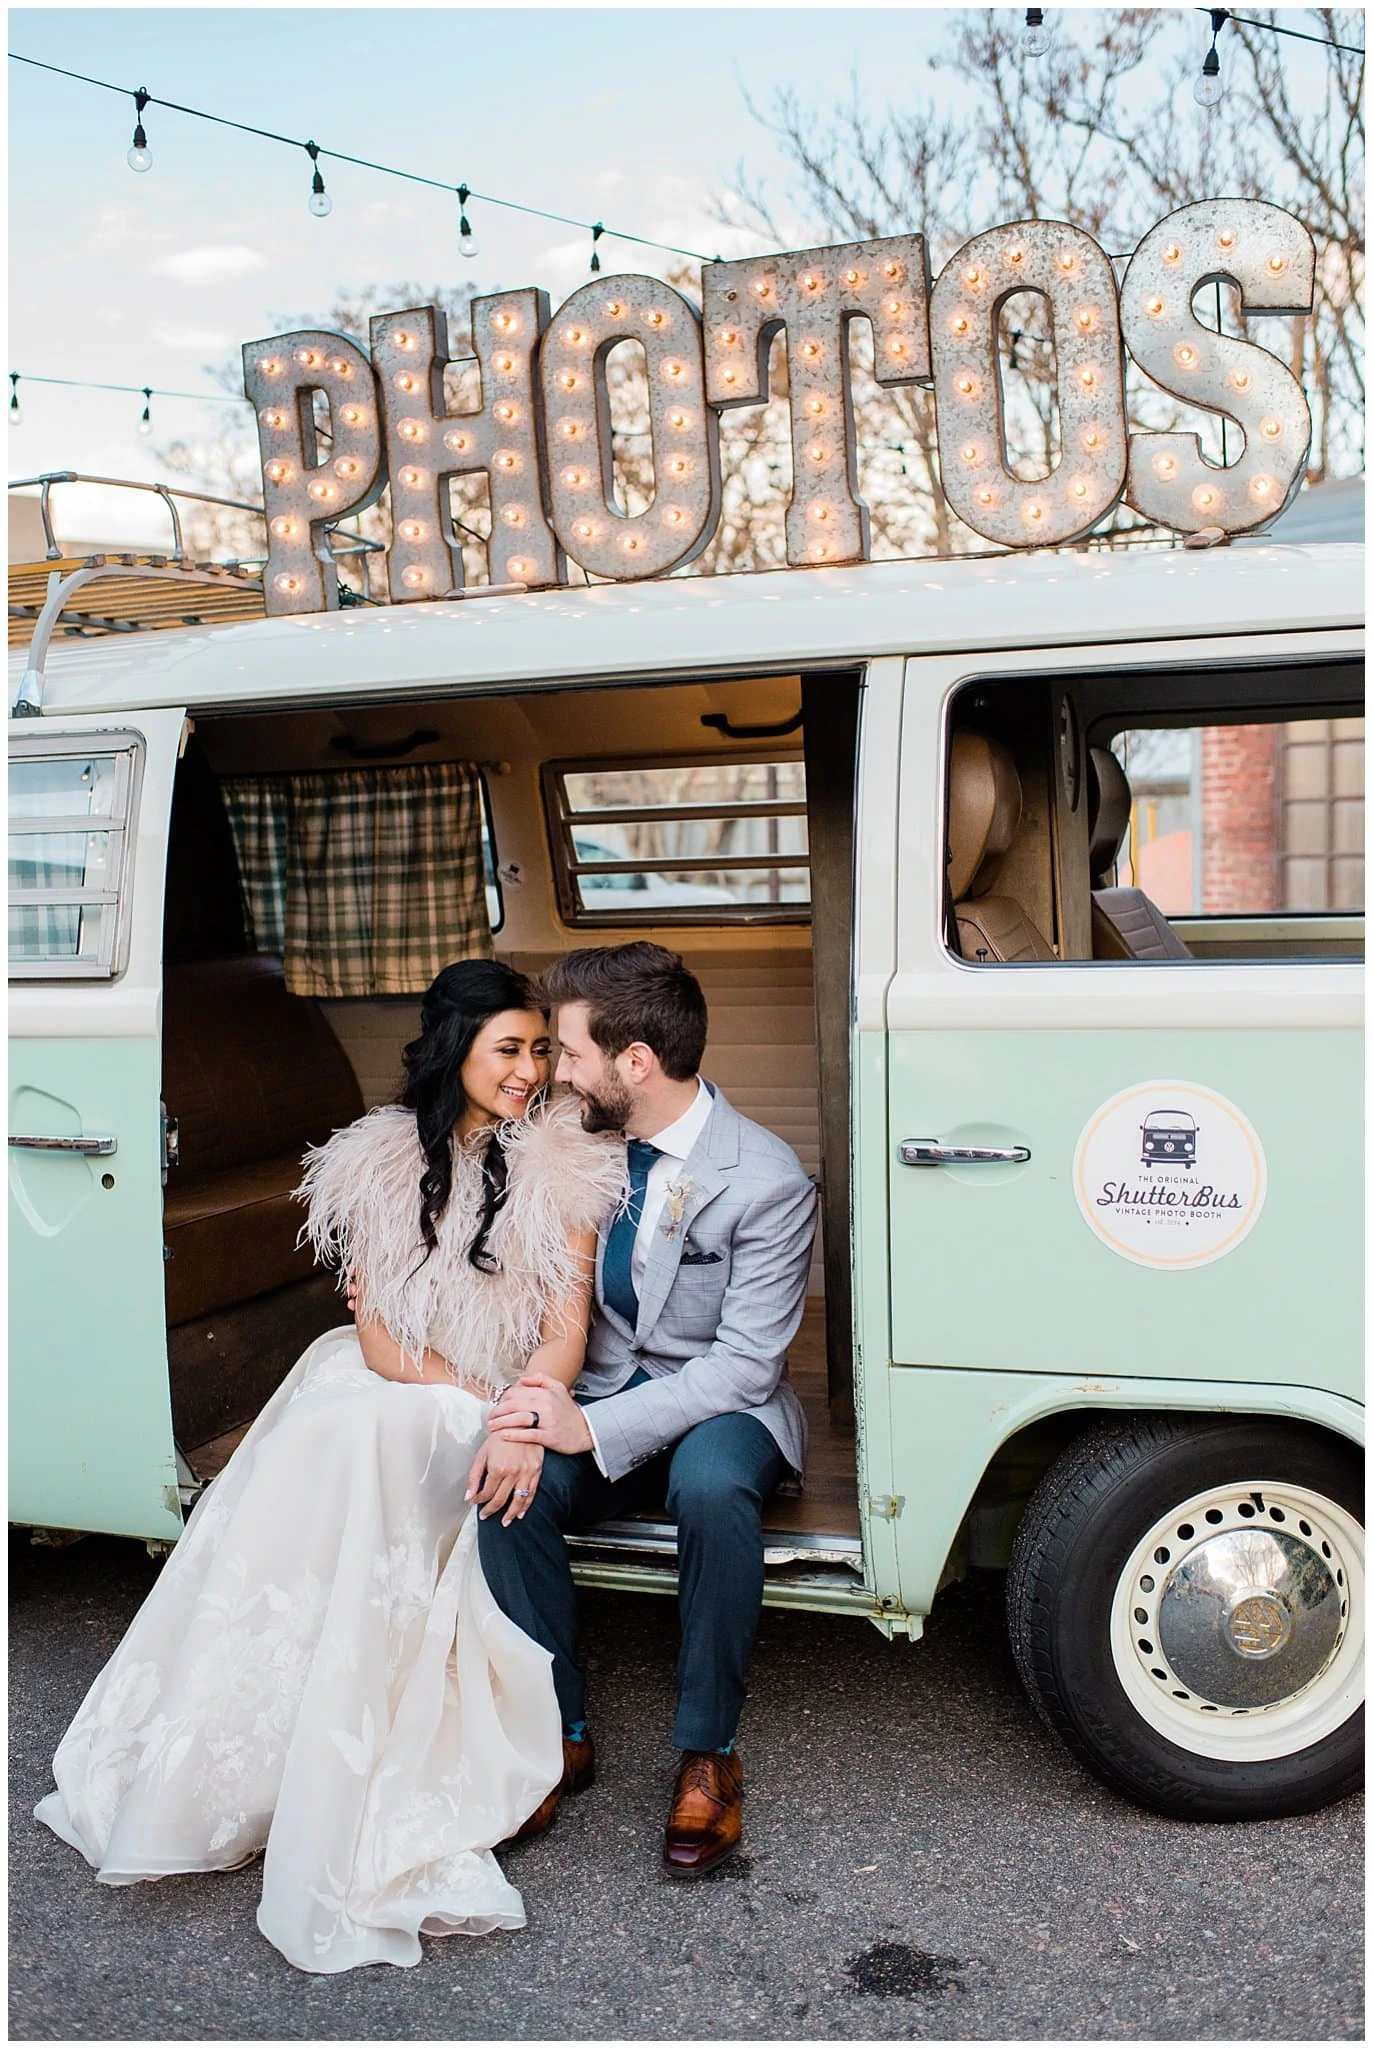 bride and groom in shutter bus photo booth at Blanc wedding by Denver Wedding Photographer Jennie Crate